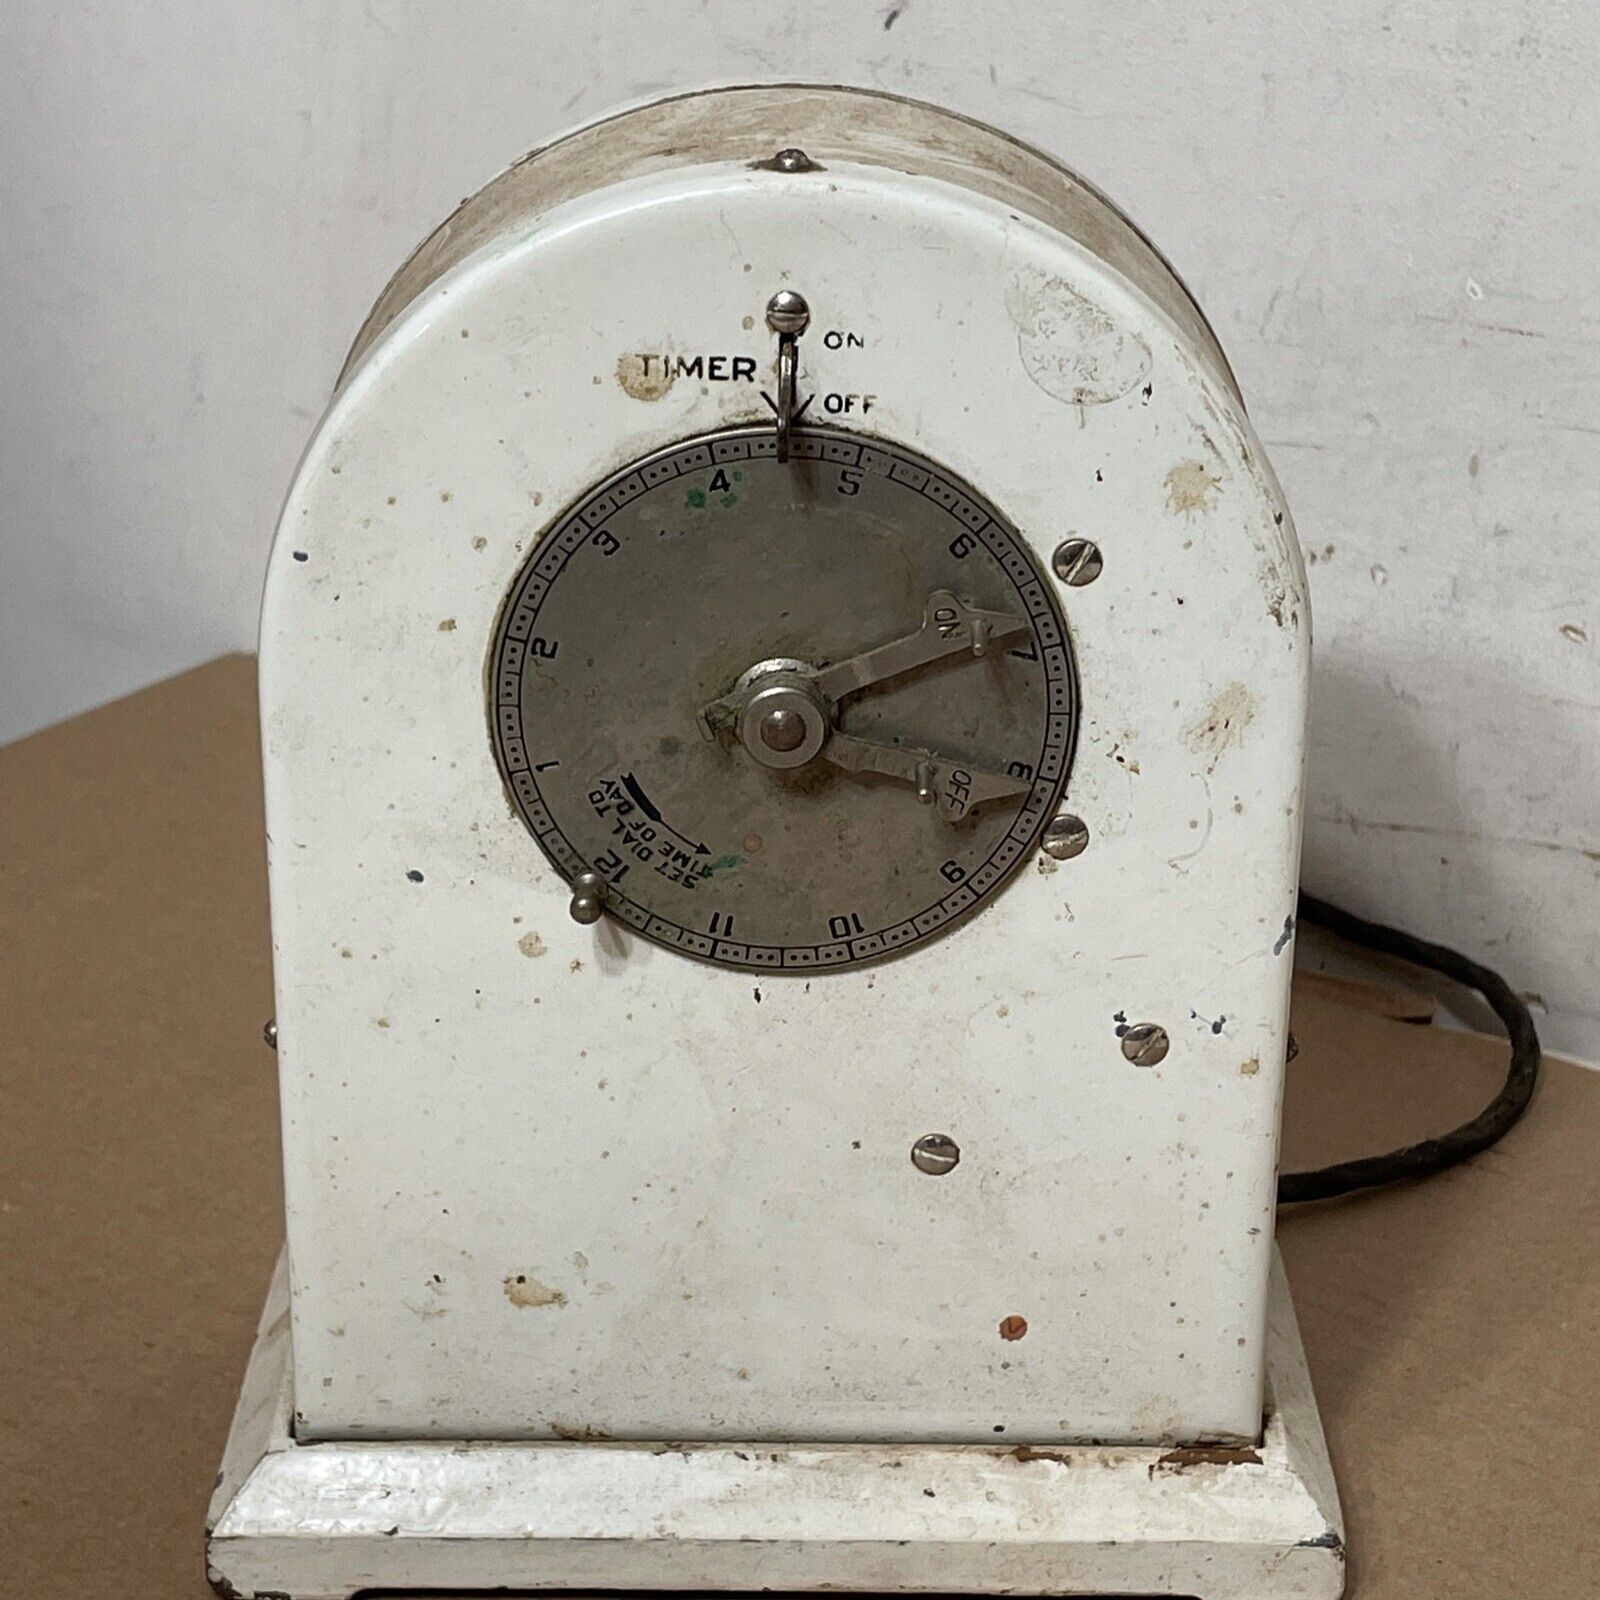 Rare Antique Hotpoint Ge Edison Elapsed Time Switch 1920s Kitchen Item